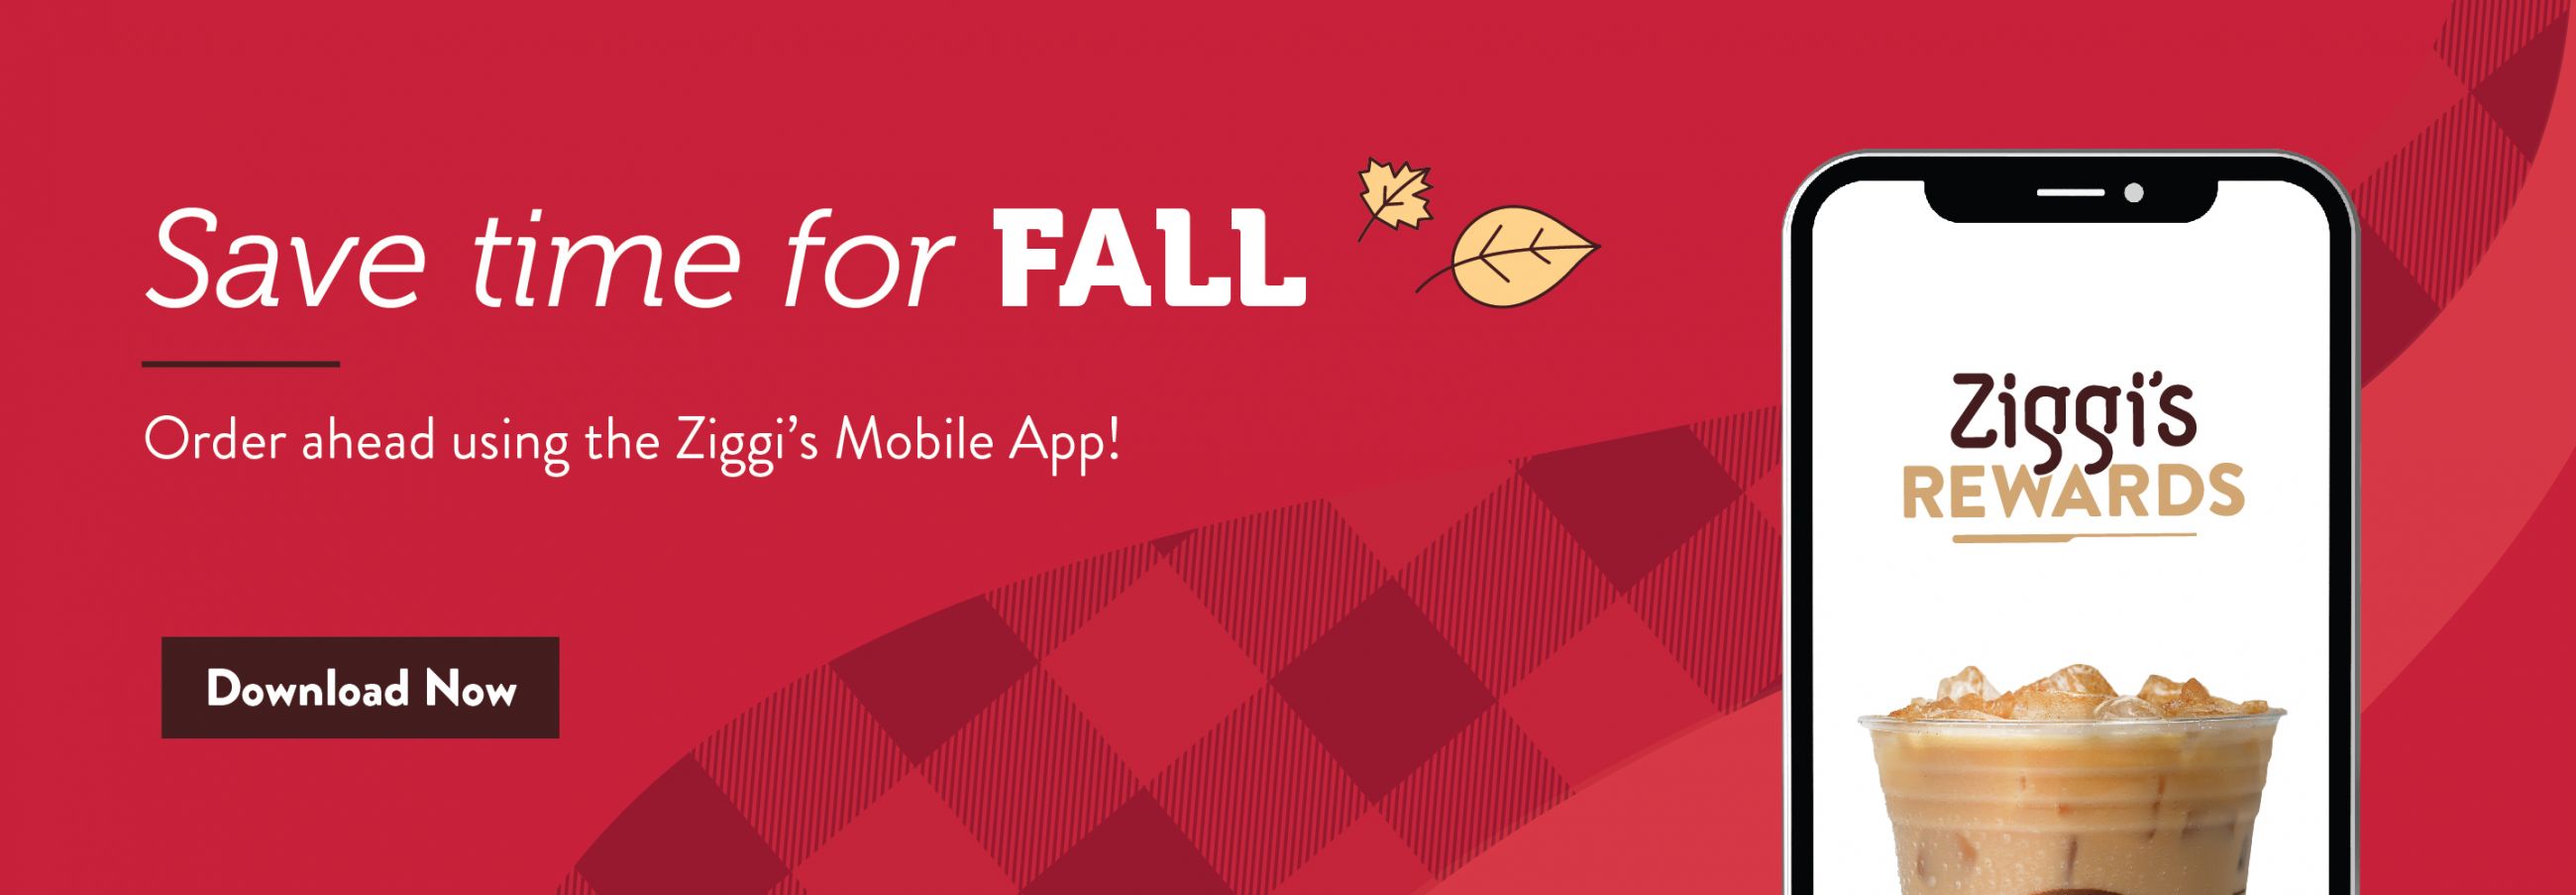 Save Time for Fall text on red background with image of mobile app screen